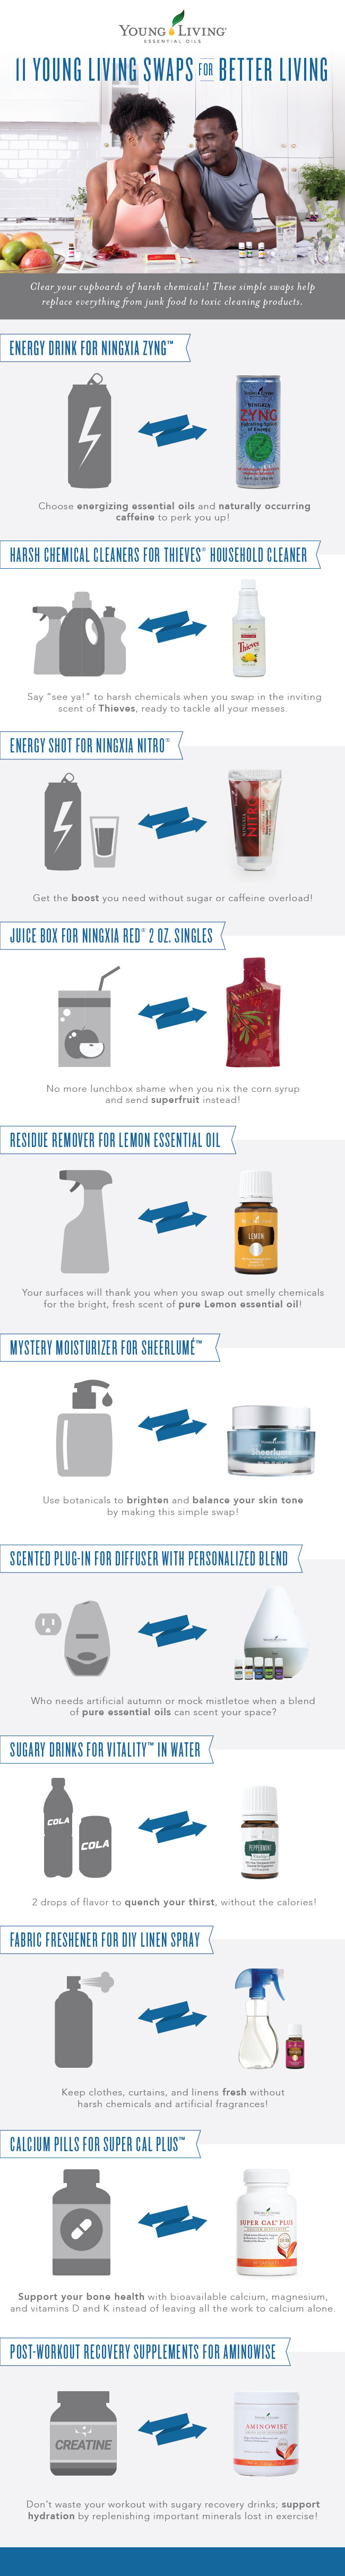 15 Young Living swaps for better living Infographic